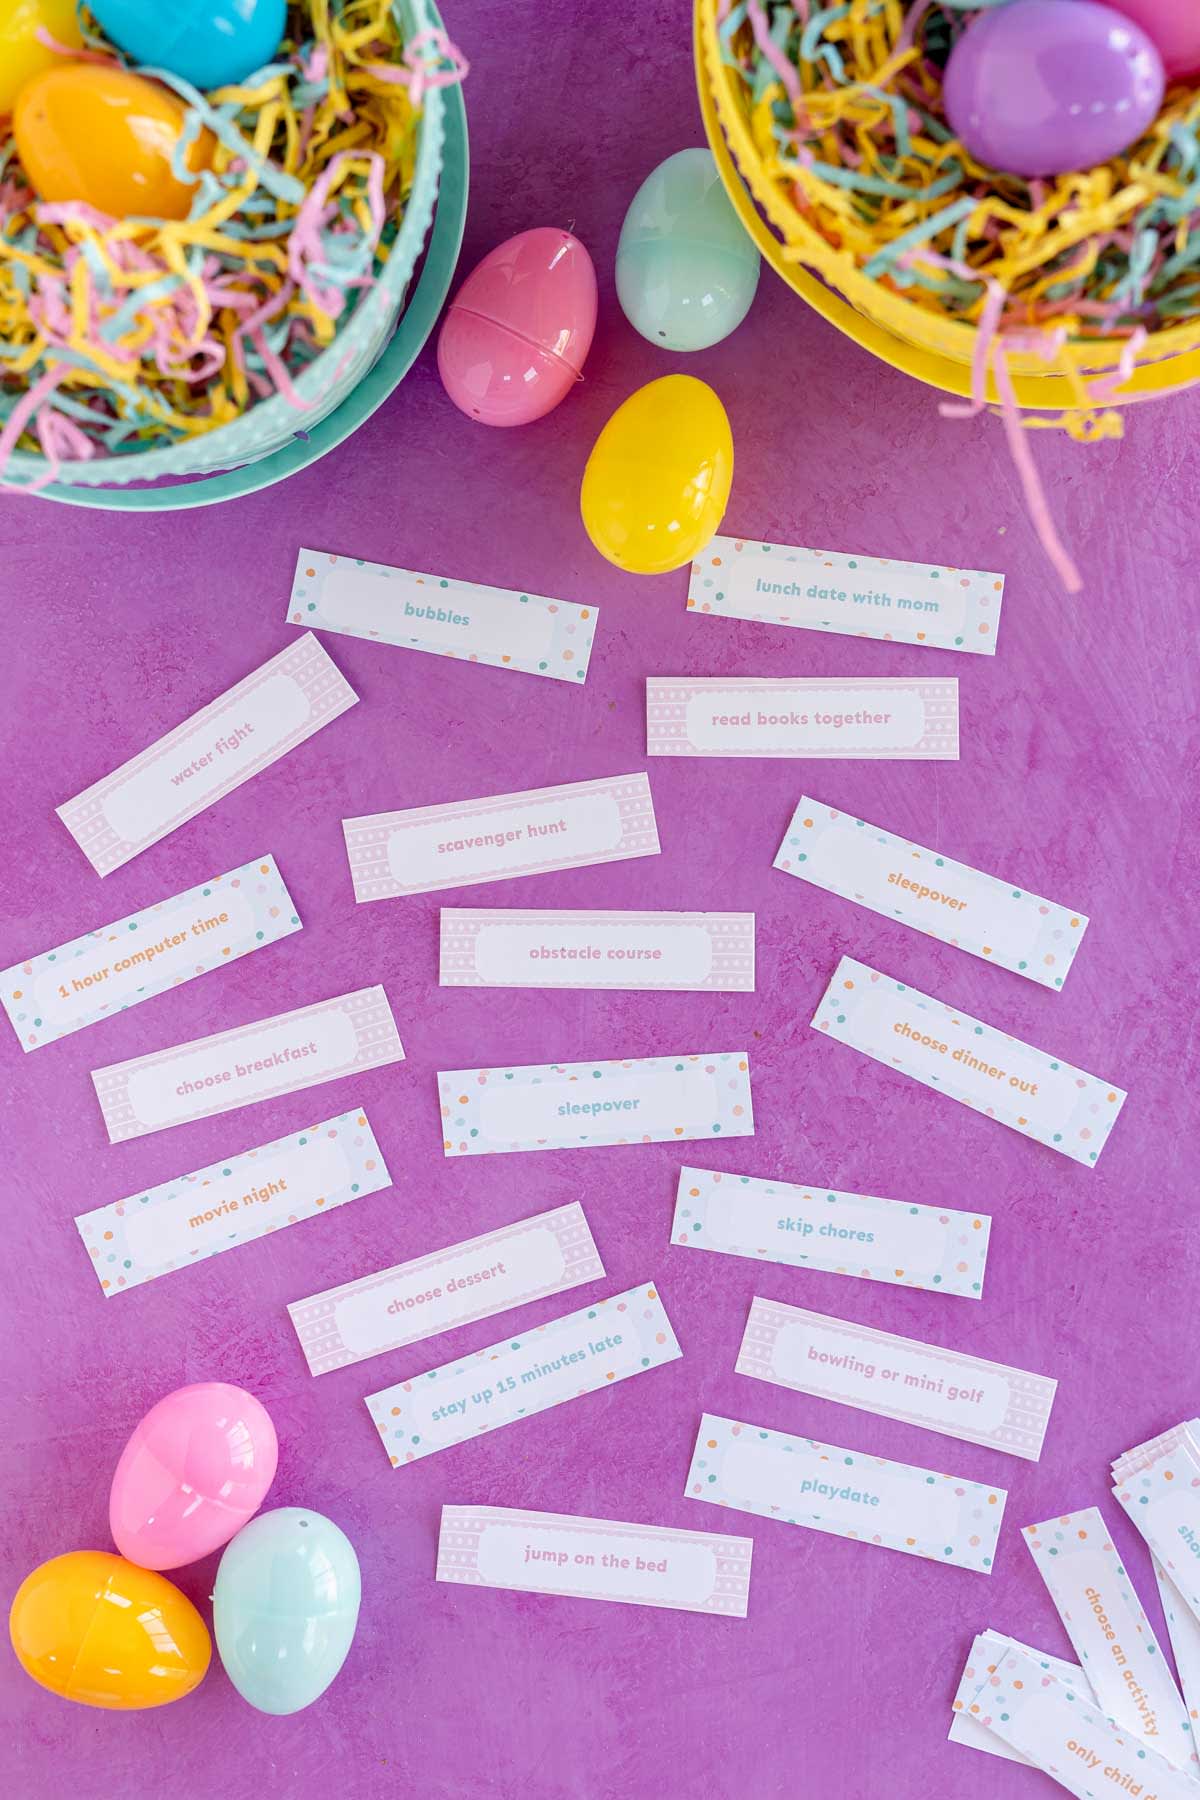 15 Fun Easter Egg Hunt Ideas for Kids and Adults